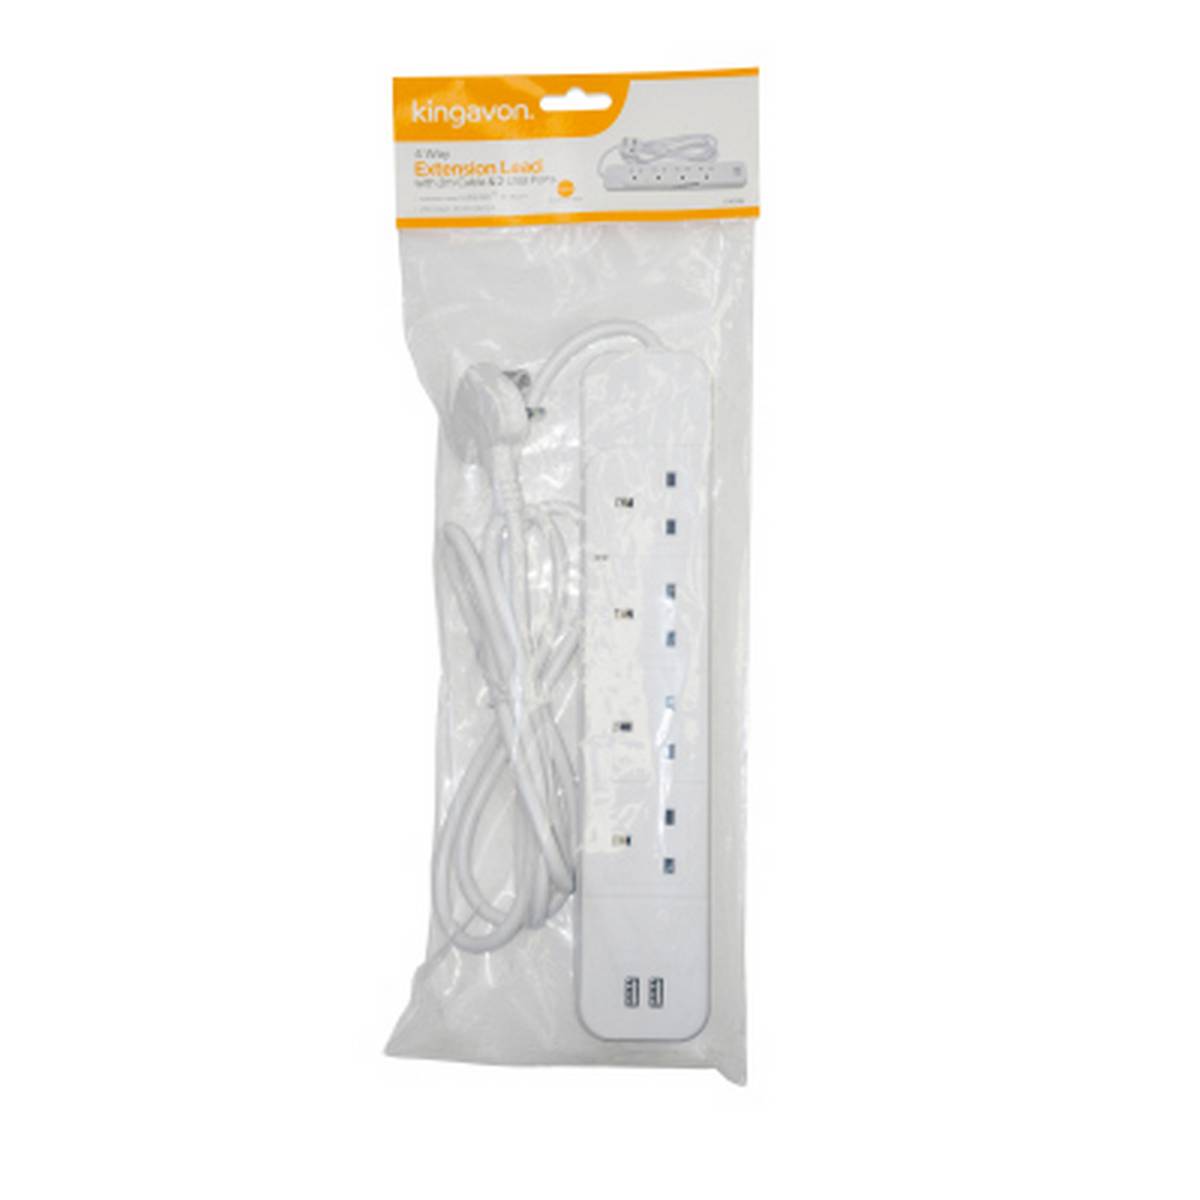 KINGAVON 4 WAY EXTENSION LEAD WITH 2M CABLE AND 2 USB PORTS BB-PA106